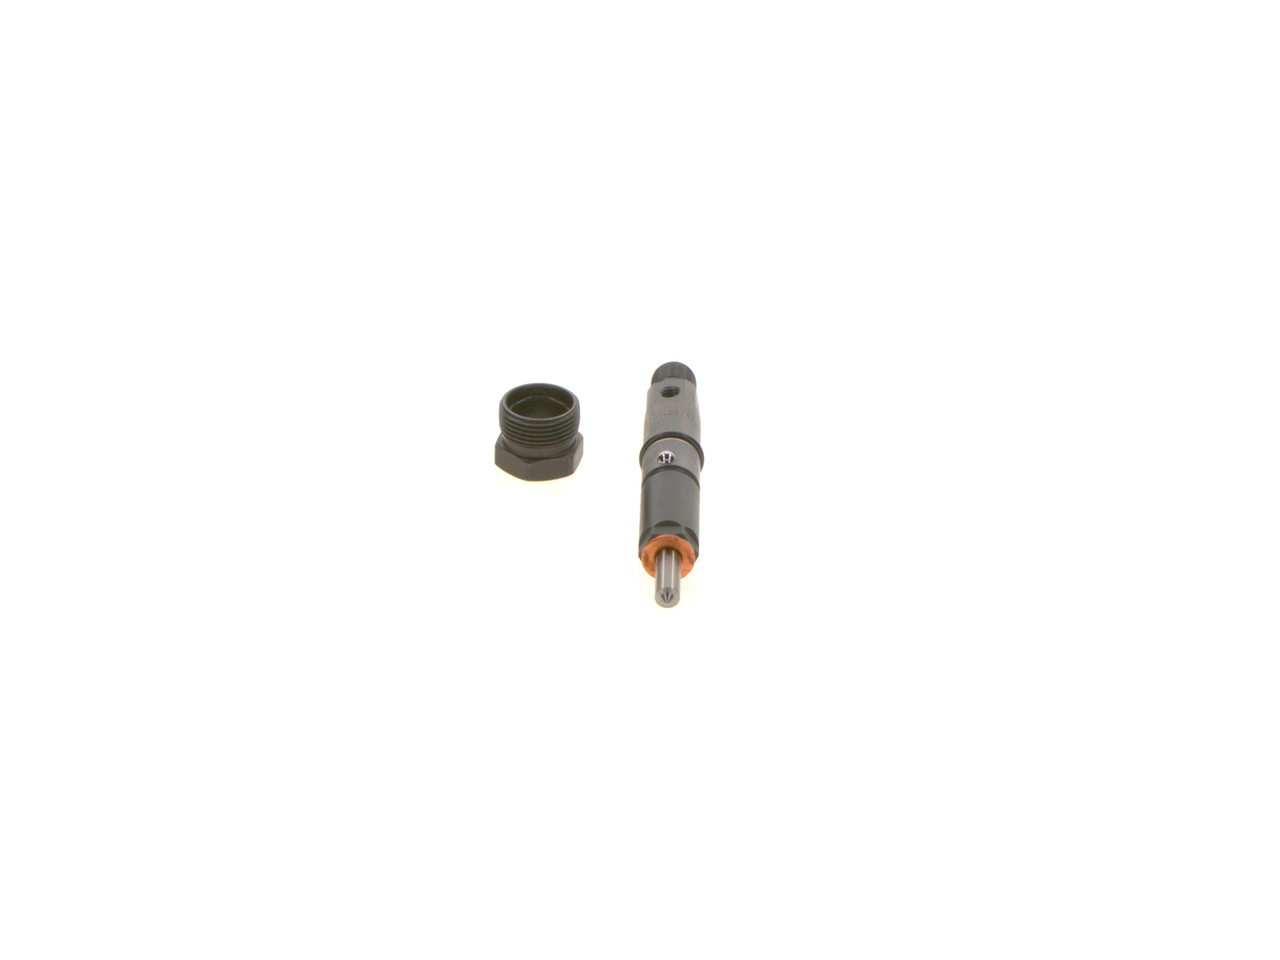 BOSCH 0 432 133 837 Nozzle and Holder Assembly